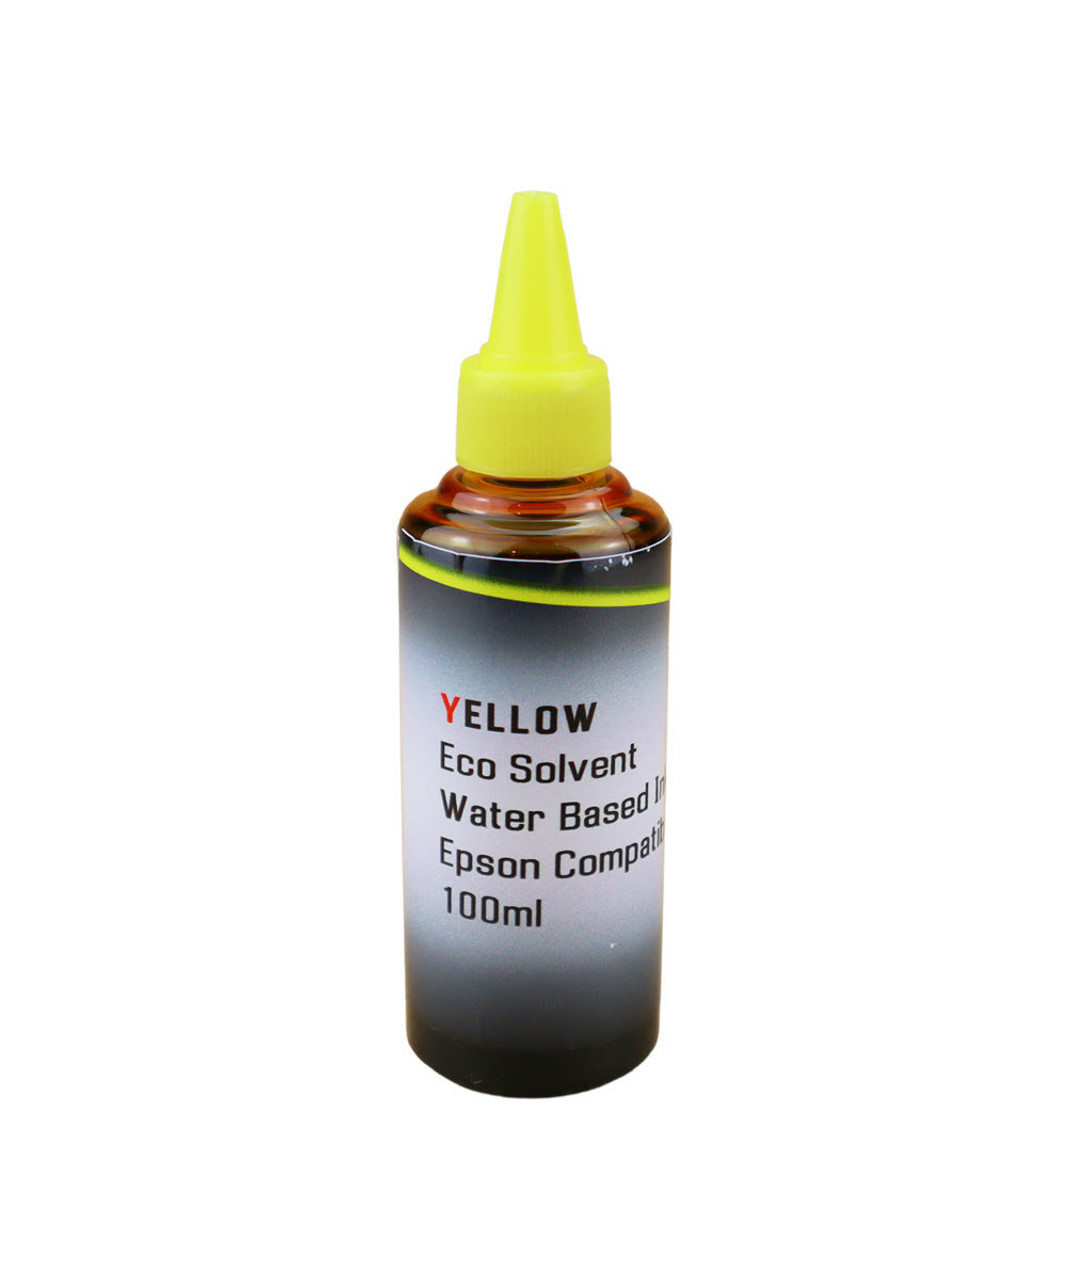 Yellow Water Based Eco Solvent Ink 100ml Bottle for WorkForce WF-7210 WF-7710 WF-7720 Printers